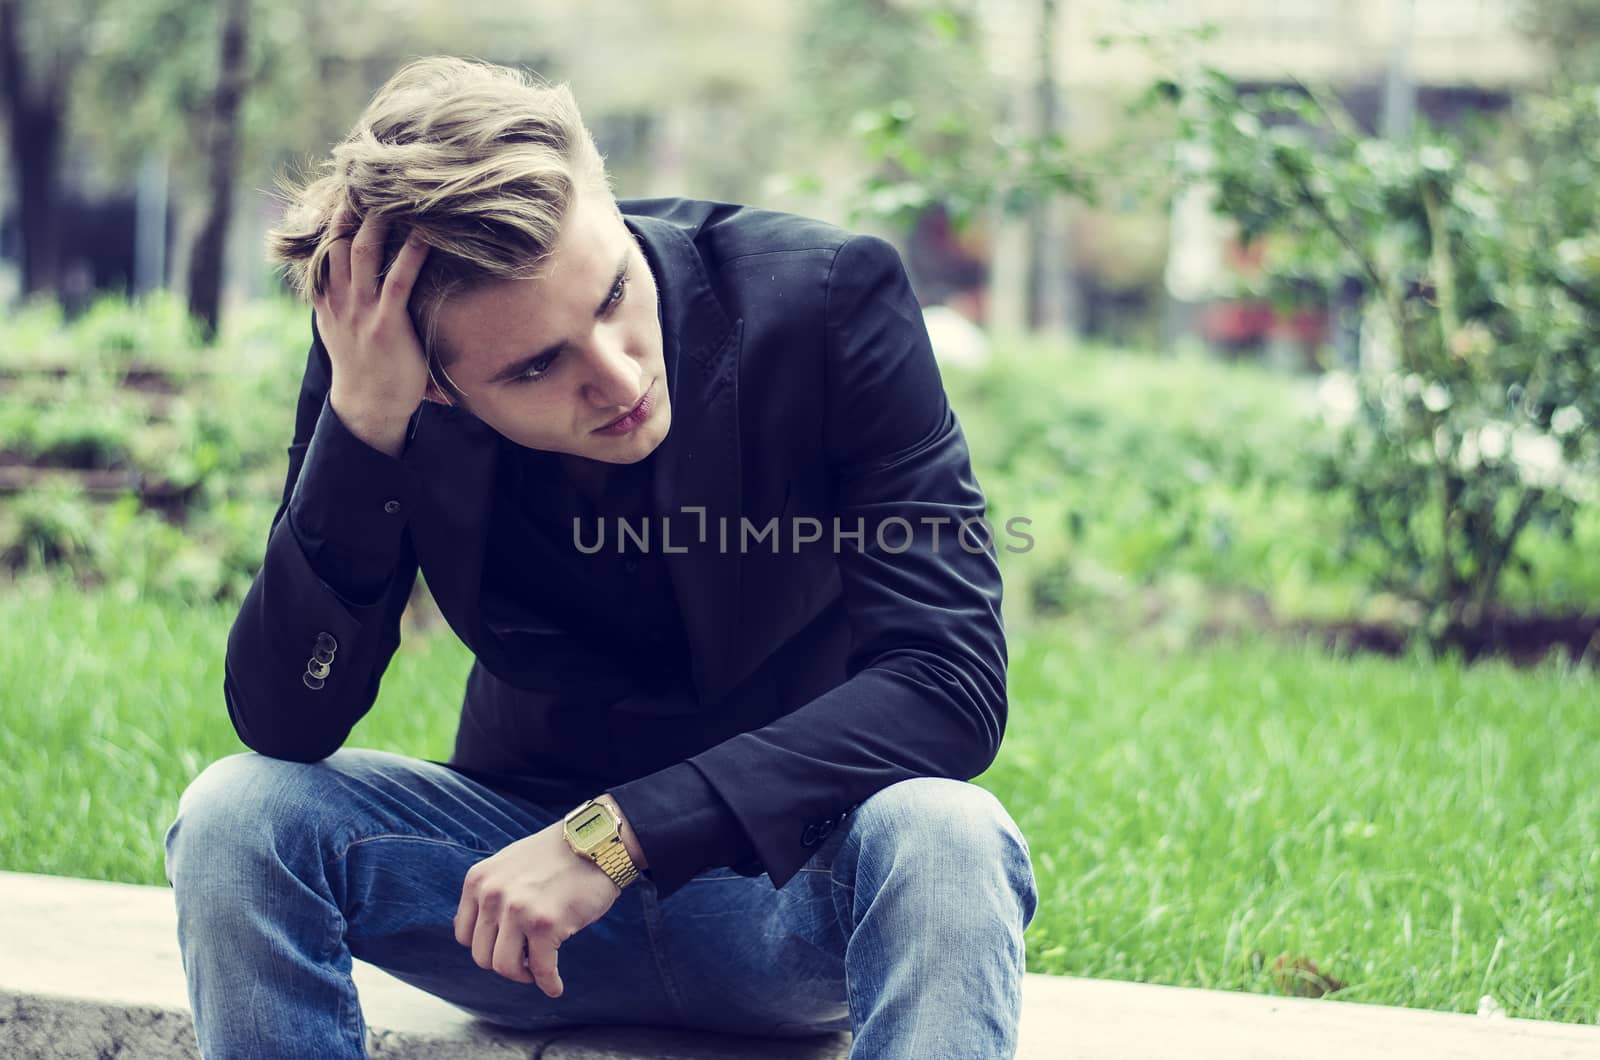 Close up Disappointed Young White Man Sitting at Street Side with Grassy Landscape at the Background